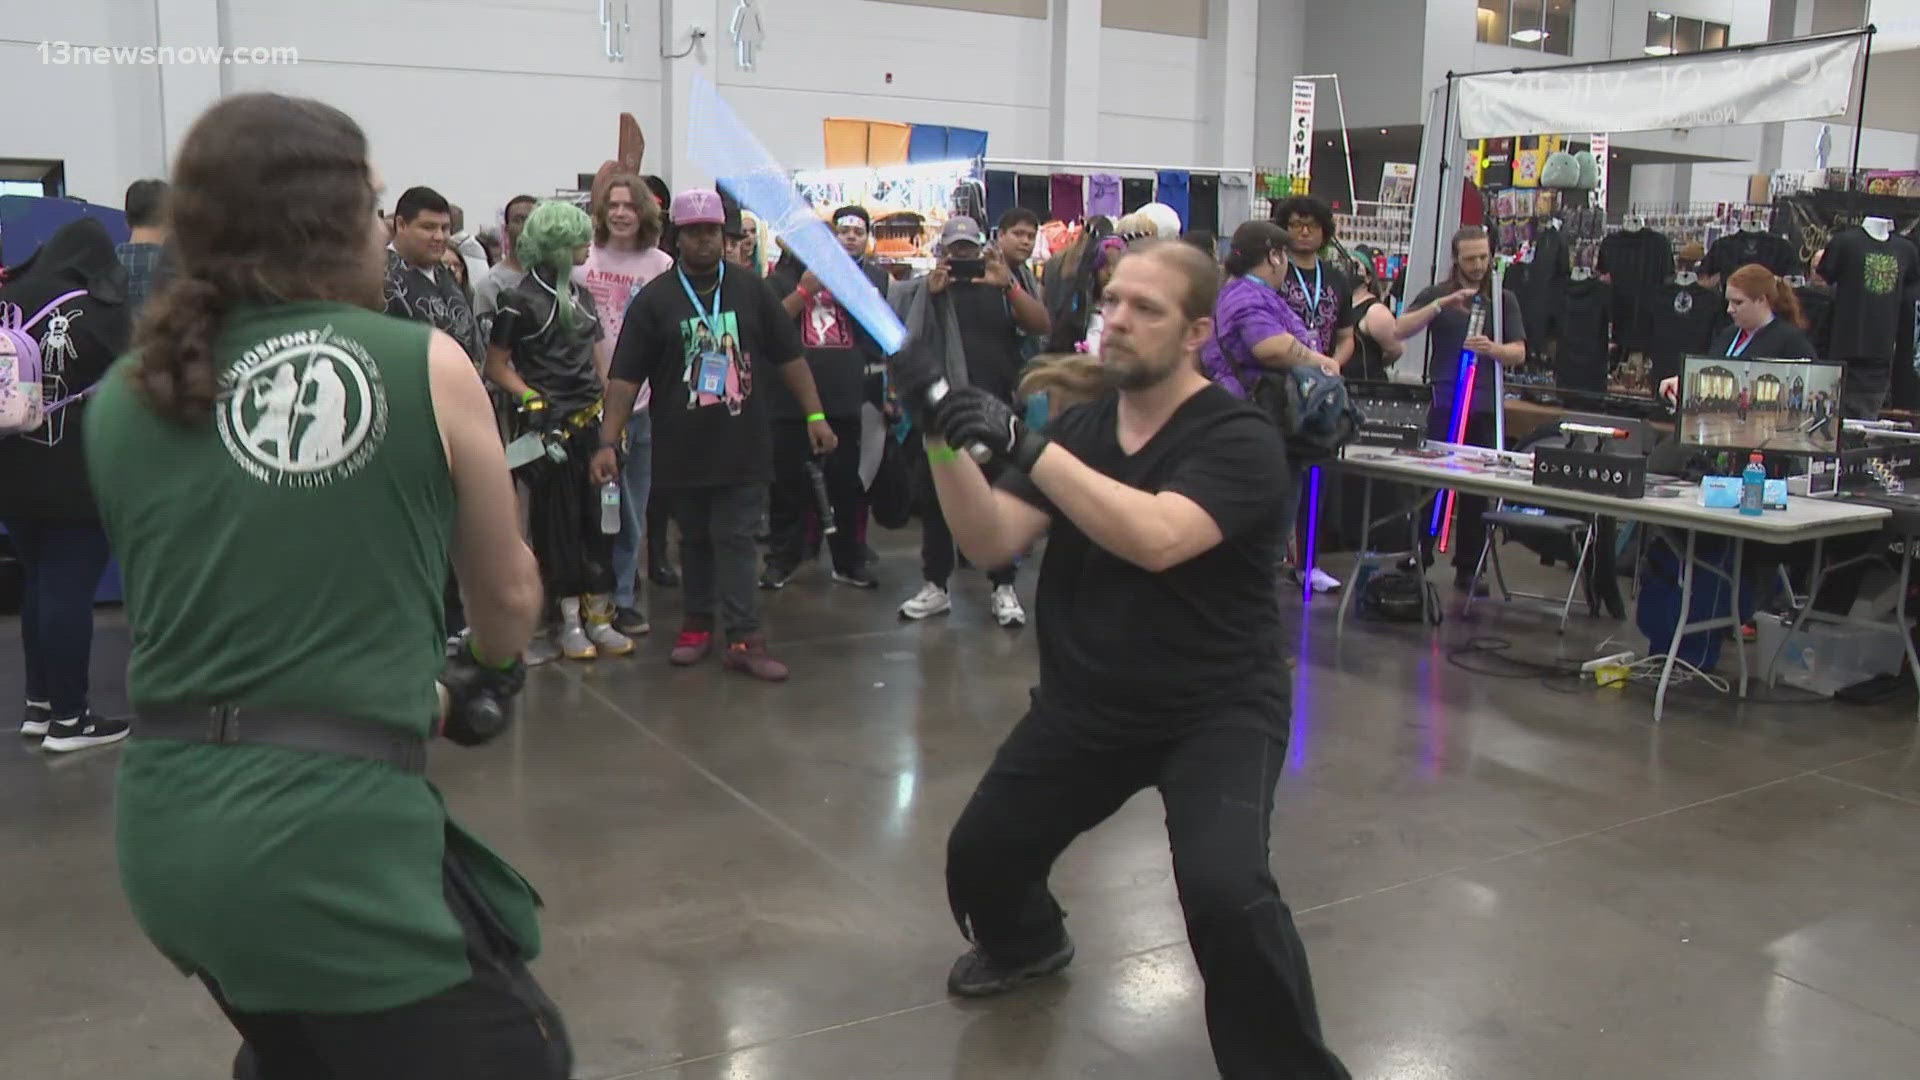 Thousands of people flocked to Virginia Beach for the Tidewater Comicon.